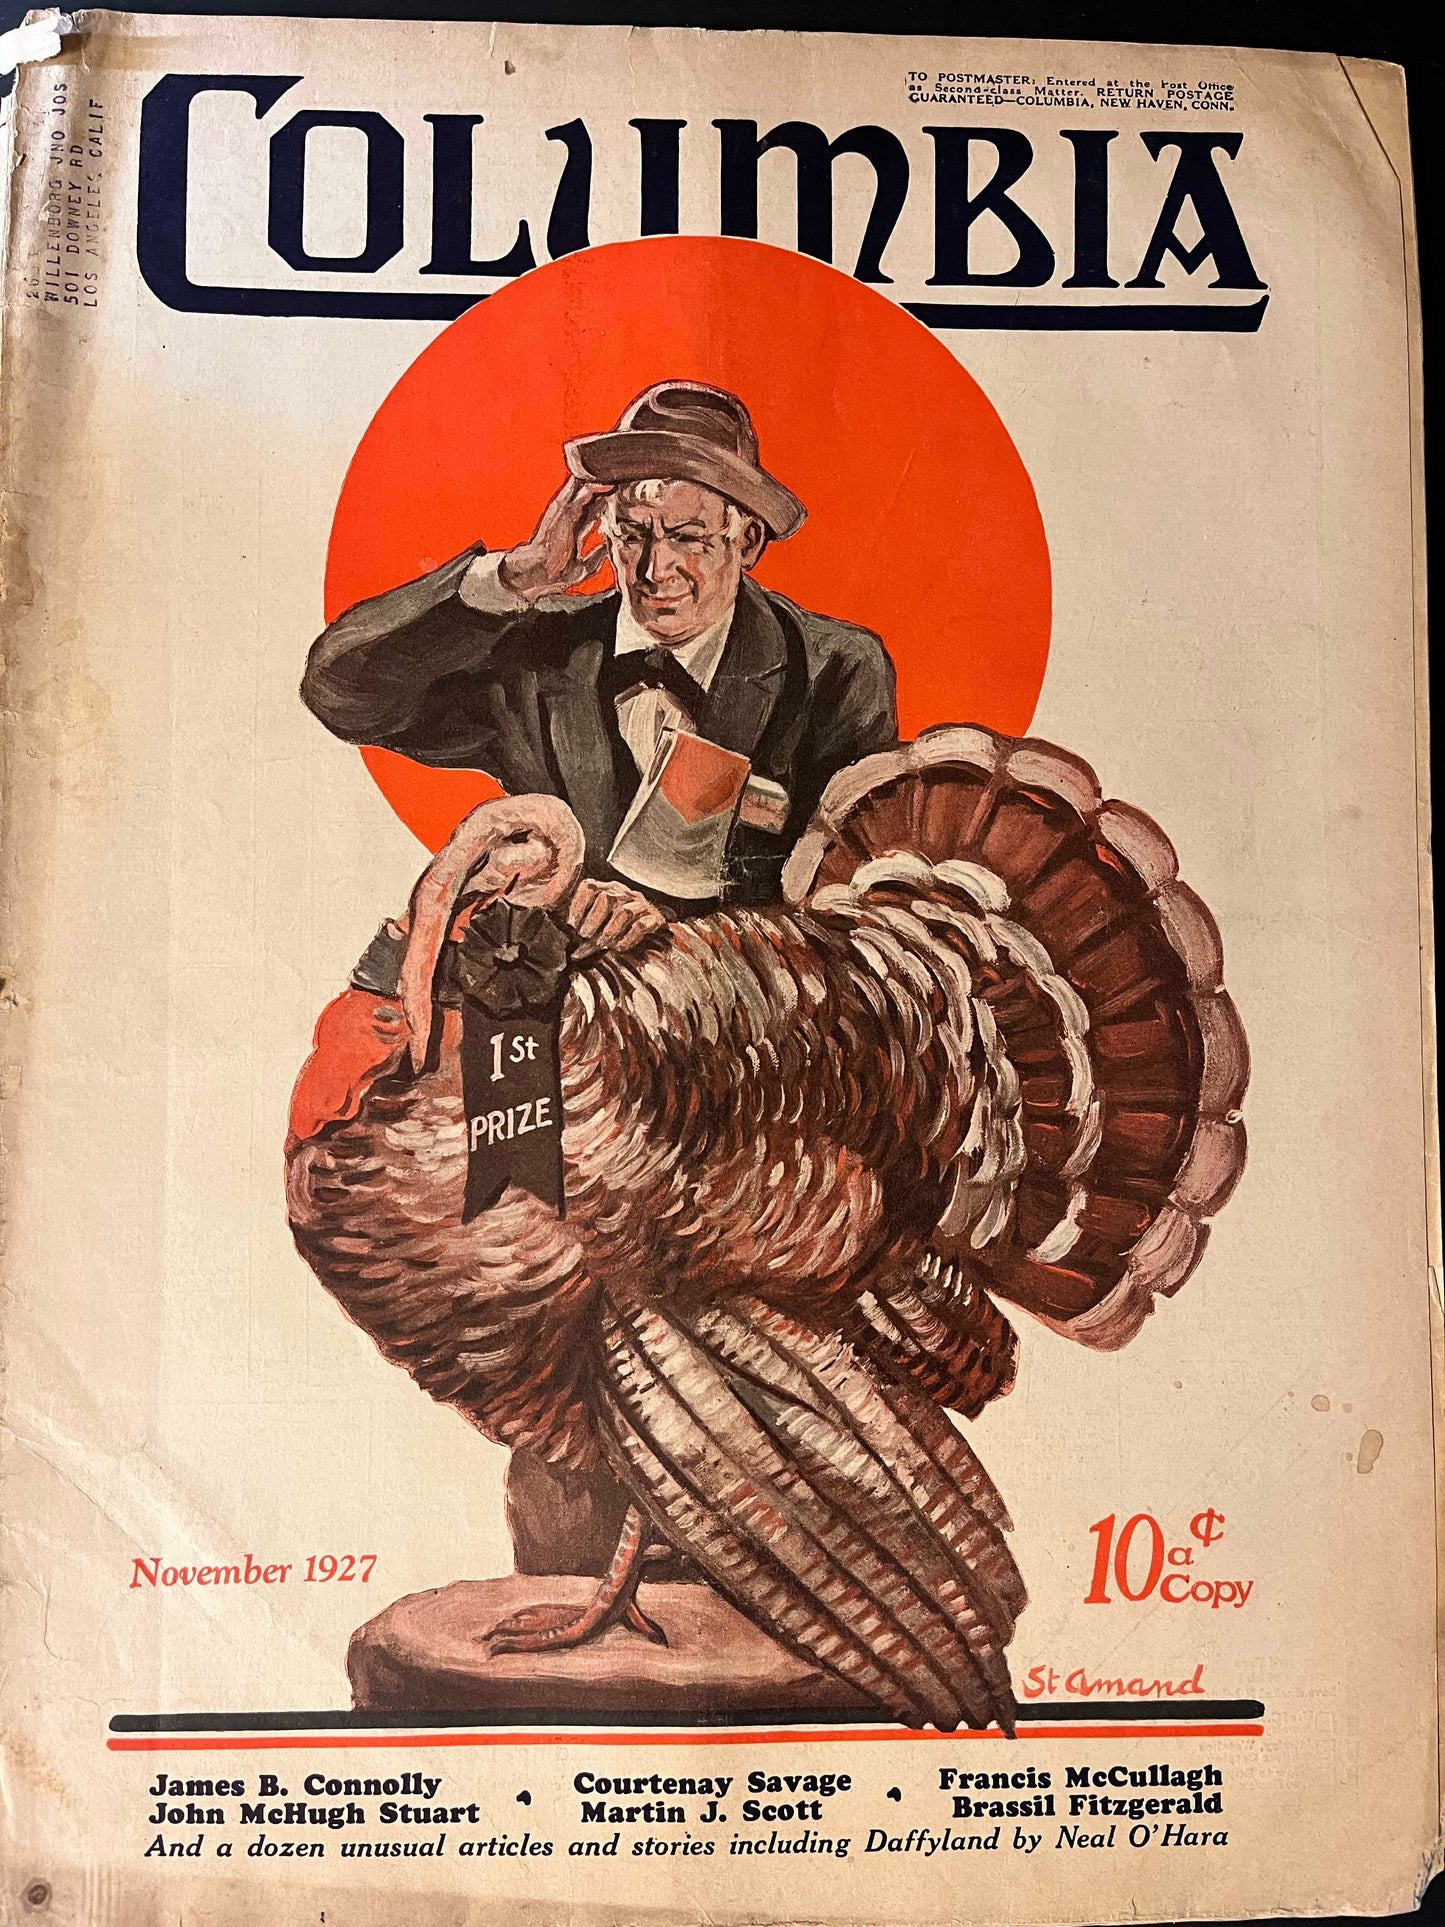 The cover features a whimsical illustration of a man tipping his hat in front of a grand prize turkey, set against a vibrant red backdrop. This eye-catching design captures the celebratory mood of Thanksgiving during the 1920s, with a touch of humor and warmth.